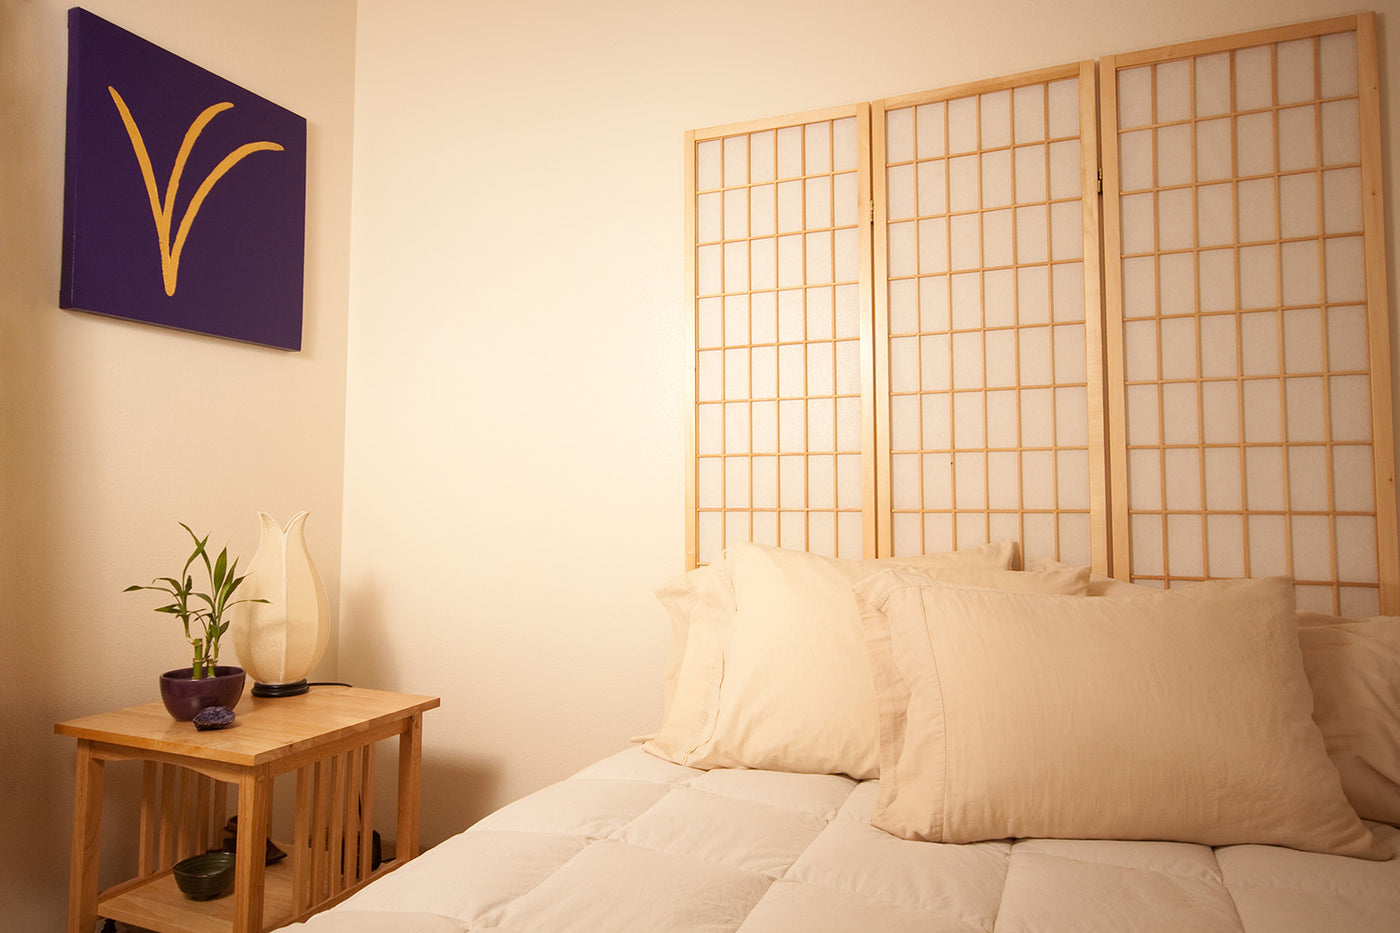 A Feng Shui Expert’s Advice on Your Bedroom